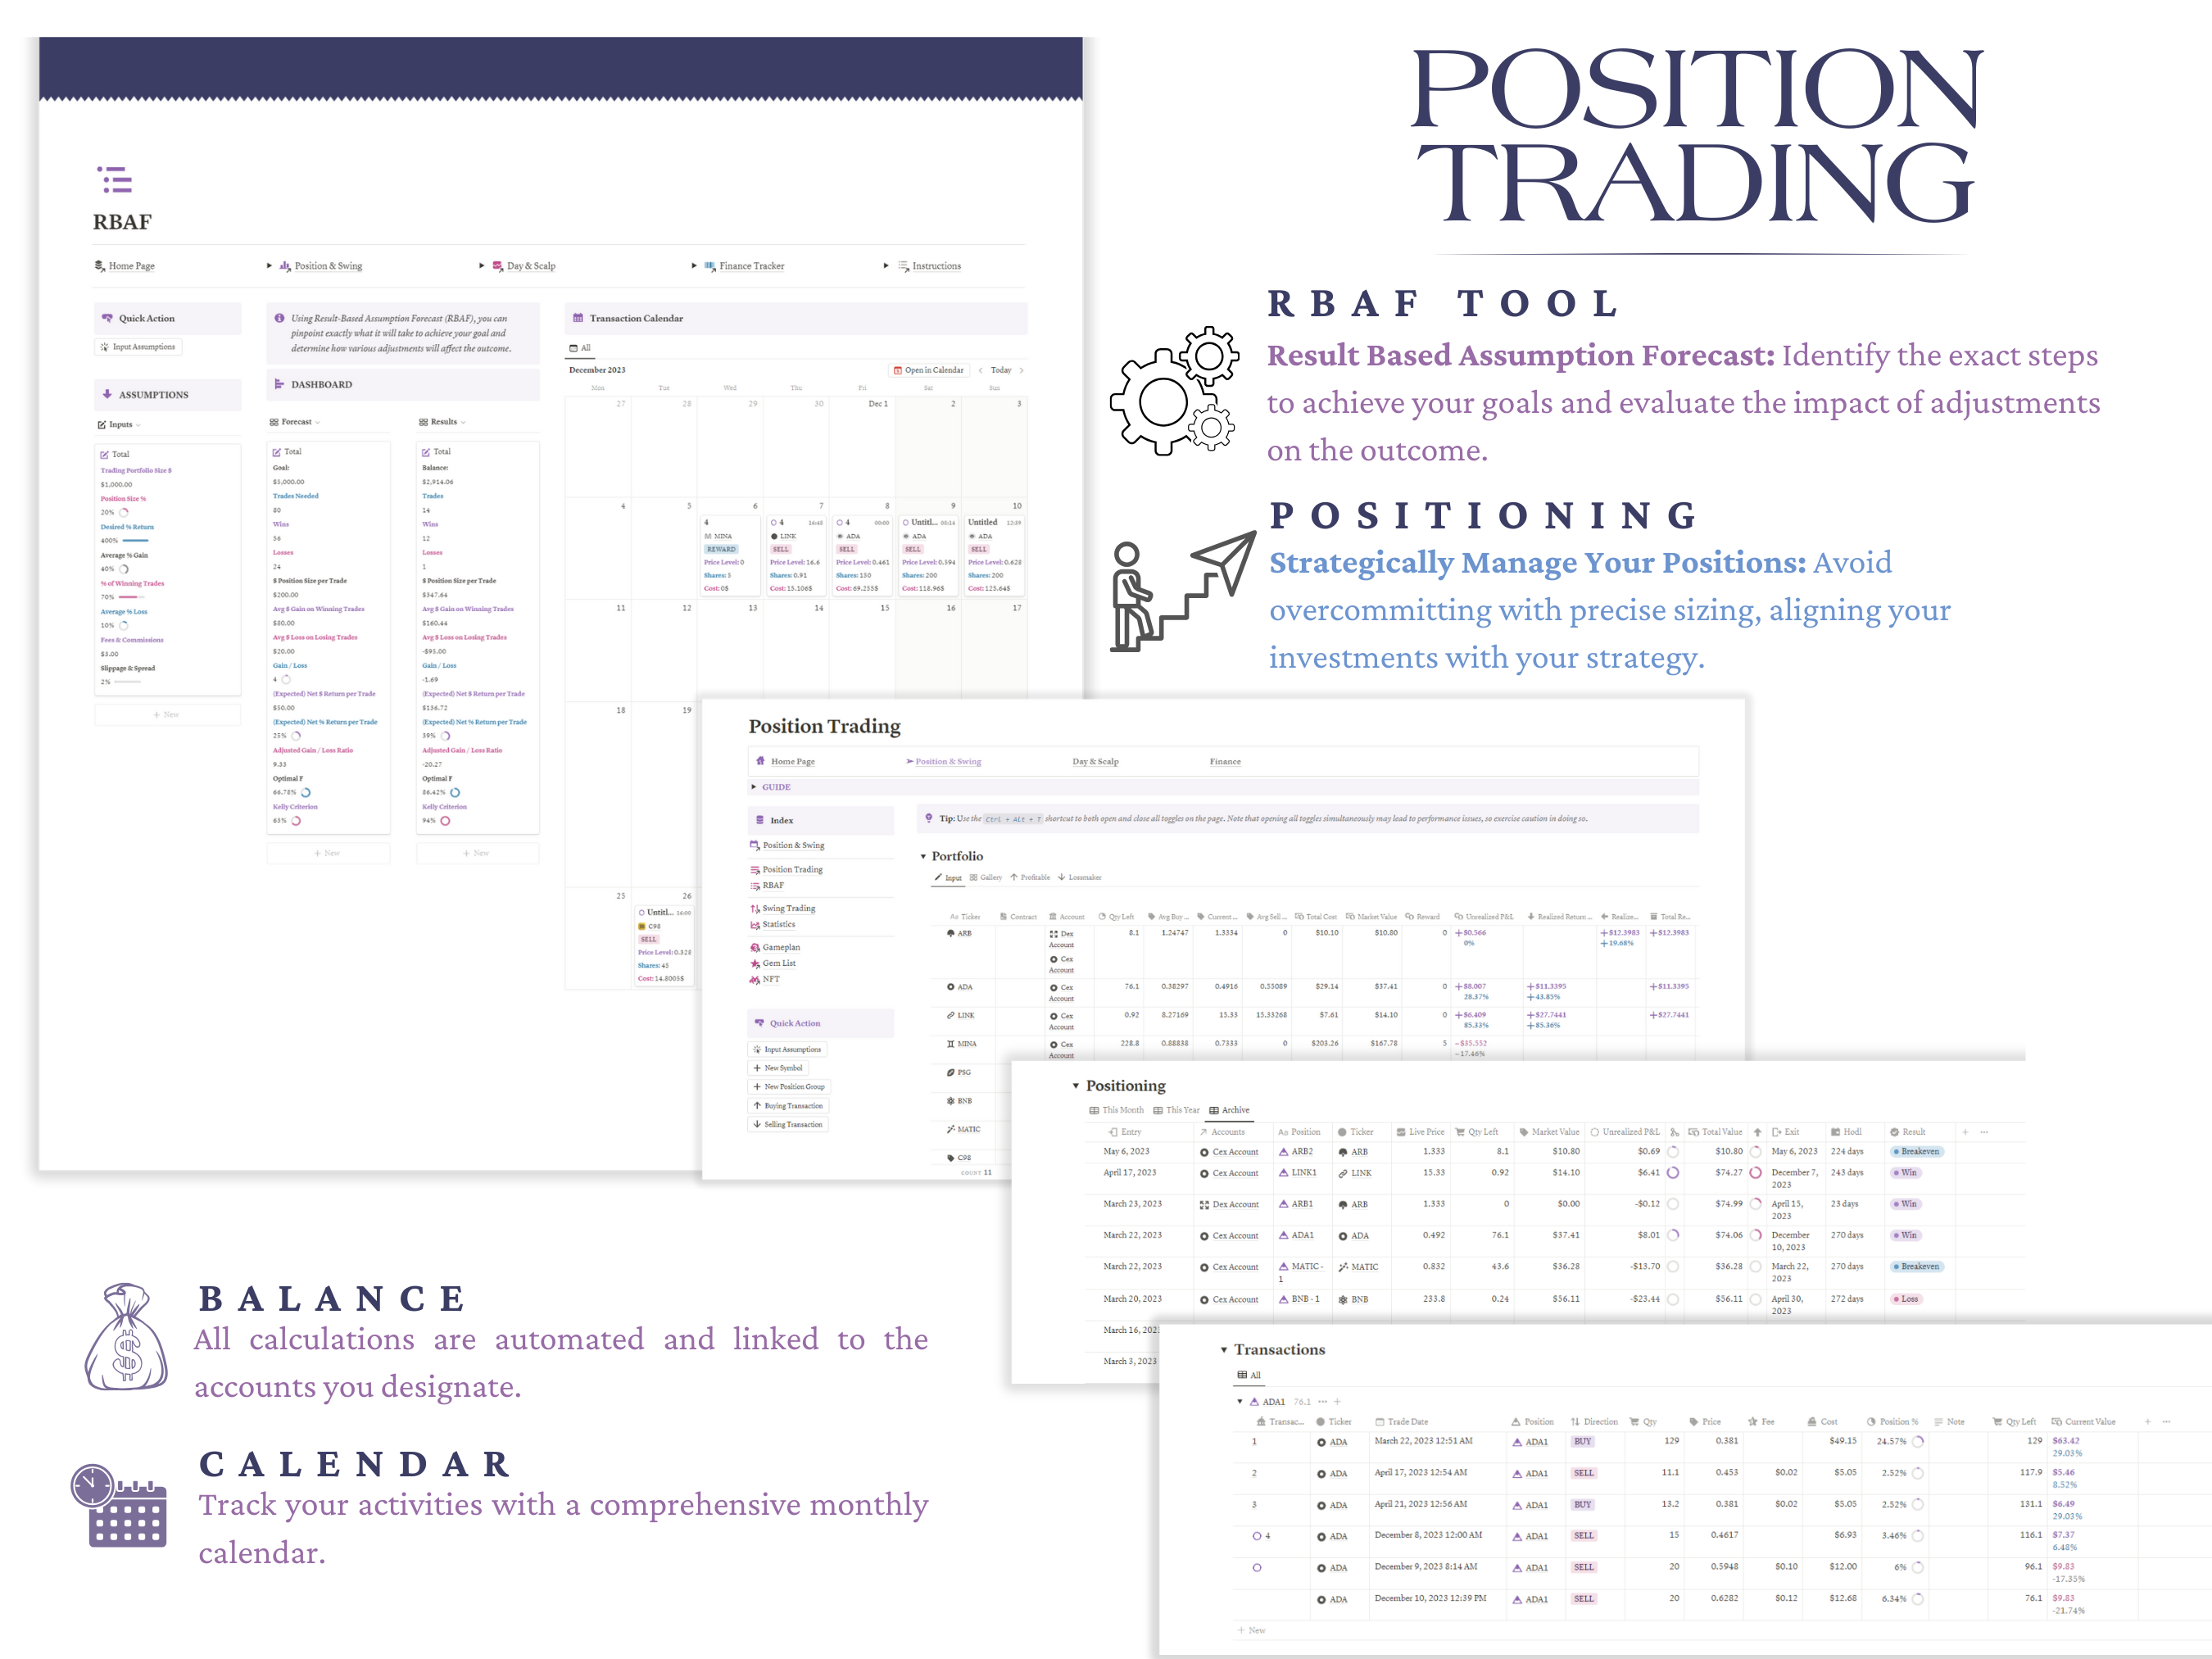 Portfolio Tracker & Trading Journals | Poisition and Swing Trading Journal | Scalping & Day Trading | Risk, Routine, and Psychology Management Tools | Weekly, Monthly, Yearly Review | Analytics & Statistics Dashboards | Interactive Financial Widgets